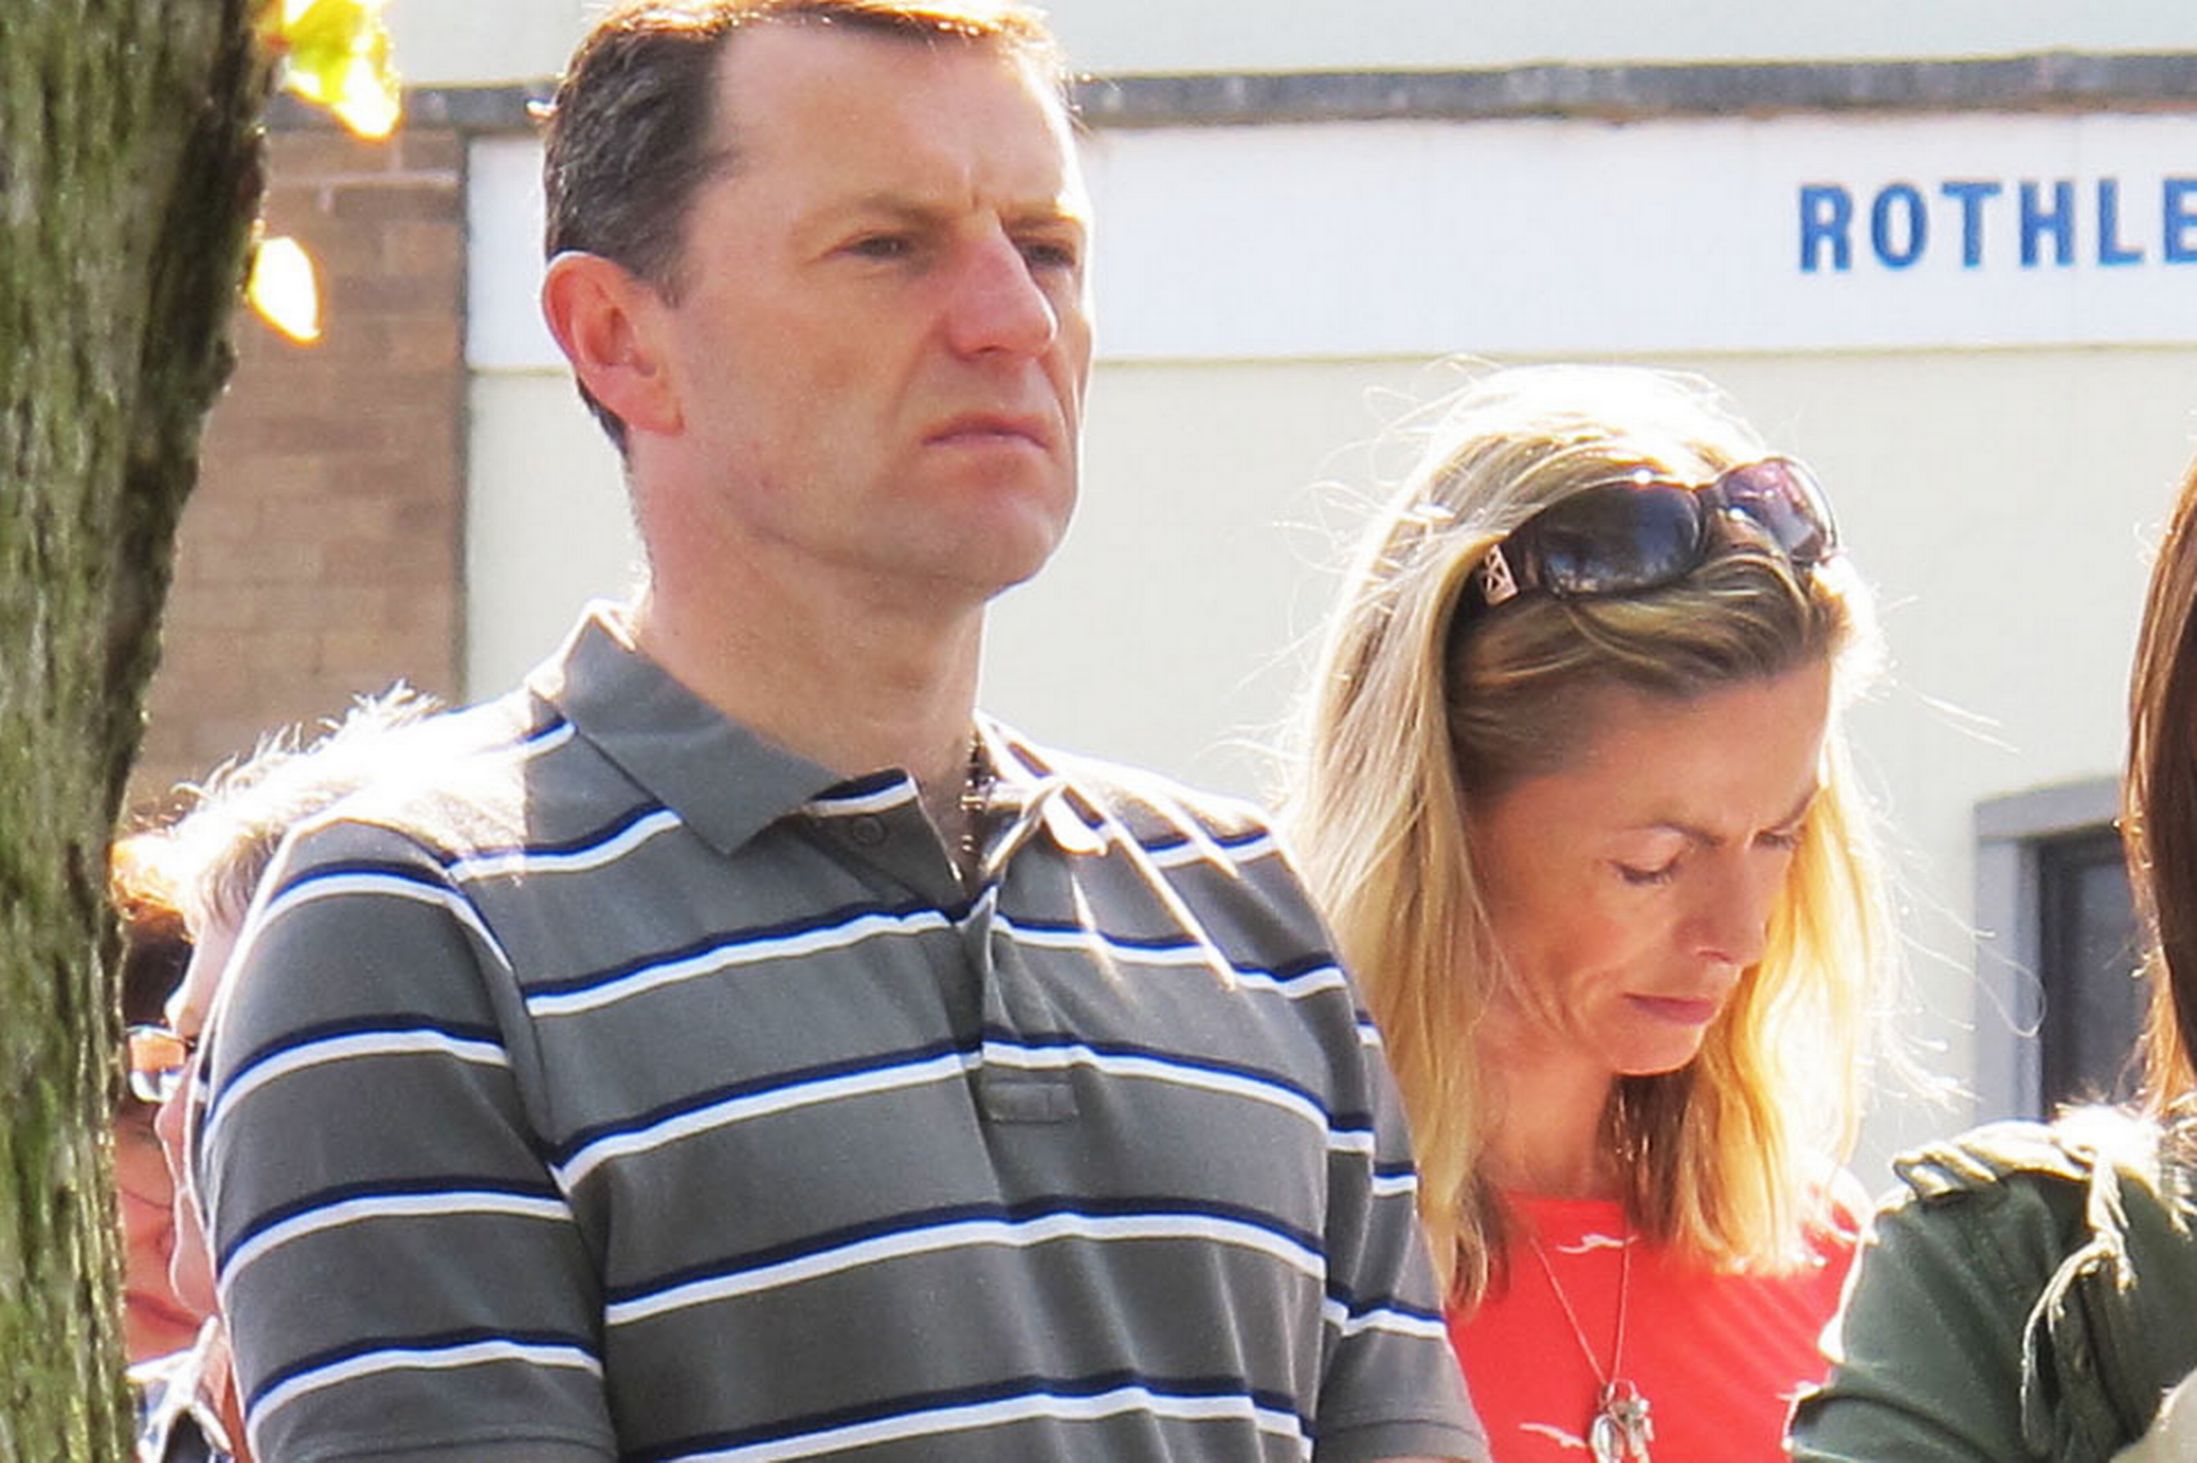 Gerry and Kate McCann, the parents of missing Madeleine McCann, during a low-key open-air service in the centre of Rothley, Leicestershire, on the seventh anniversary of her disappearance